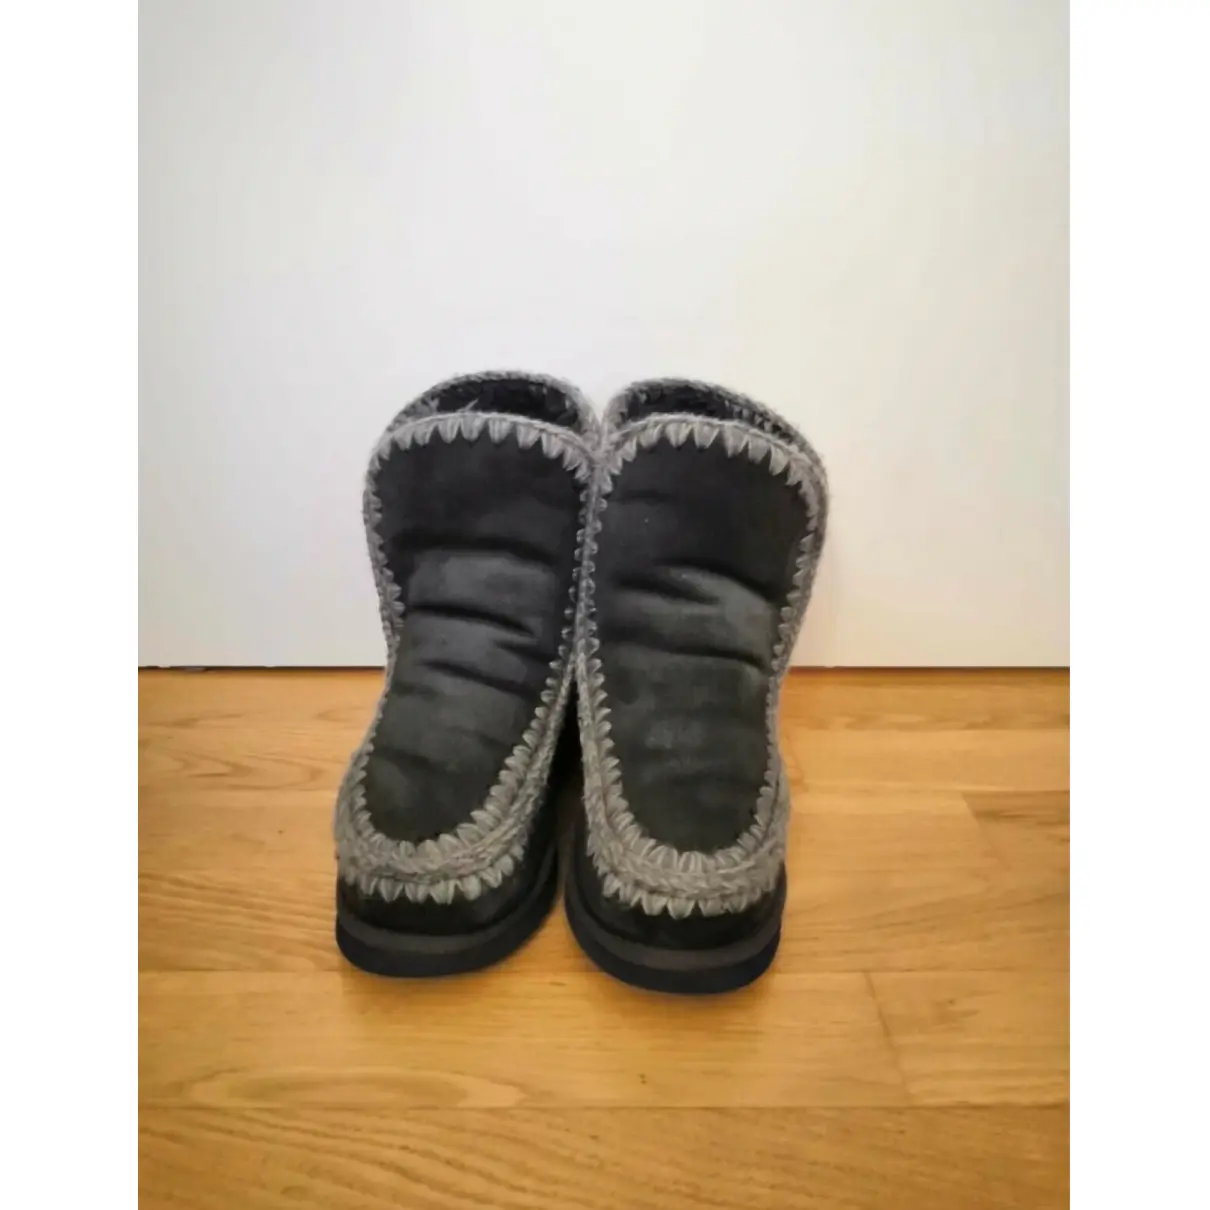 Buy Mou Leather snow boots online